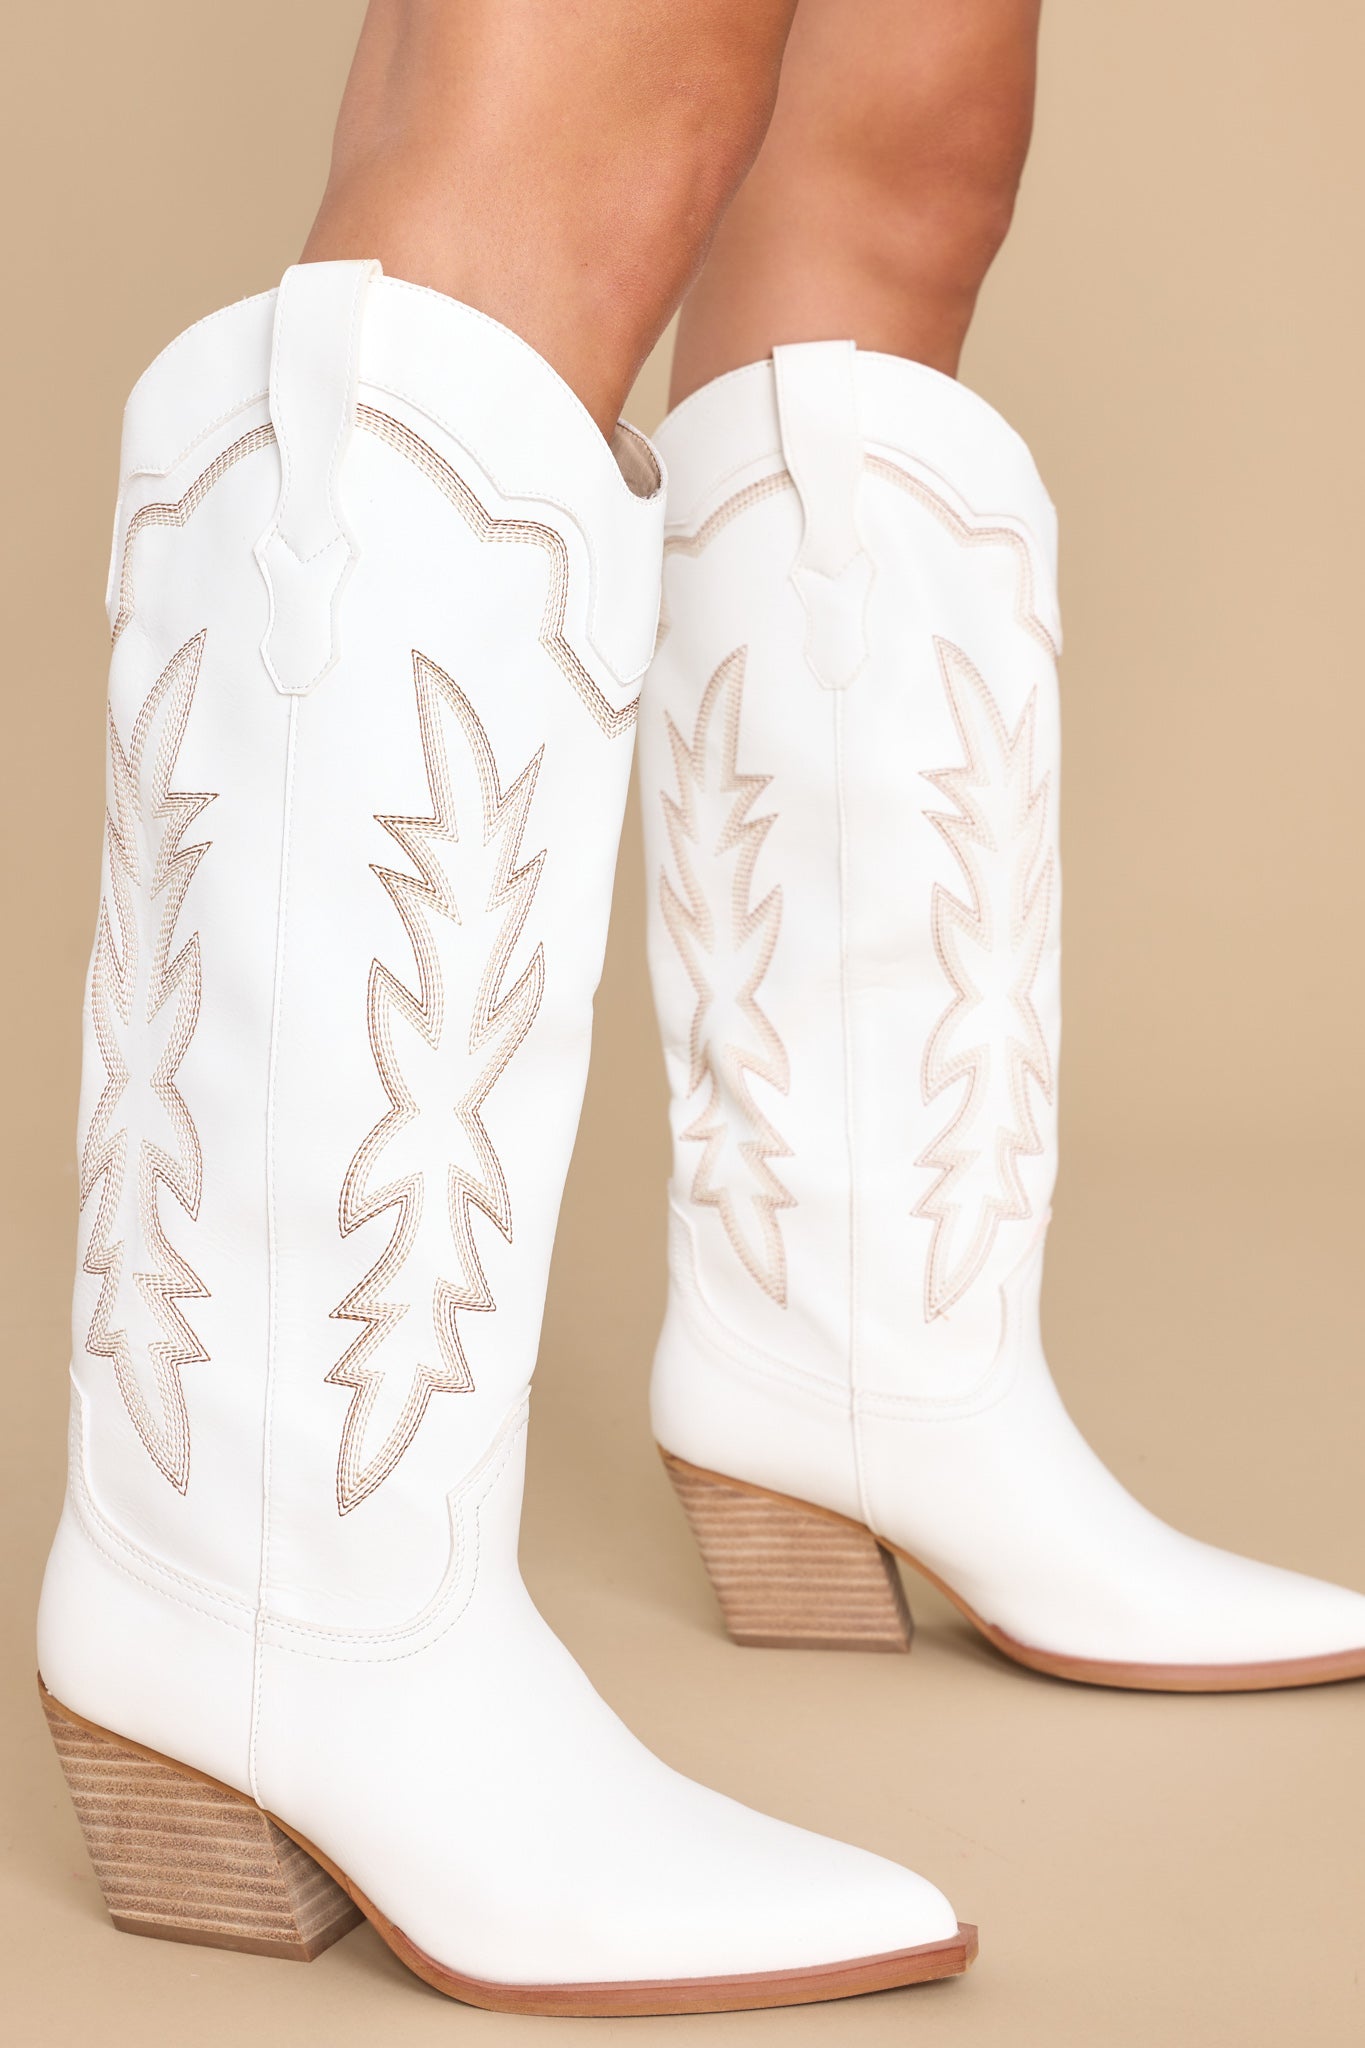 These white boots feature a pointed toe and tan stitched design up the leg. 